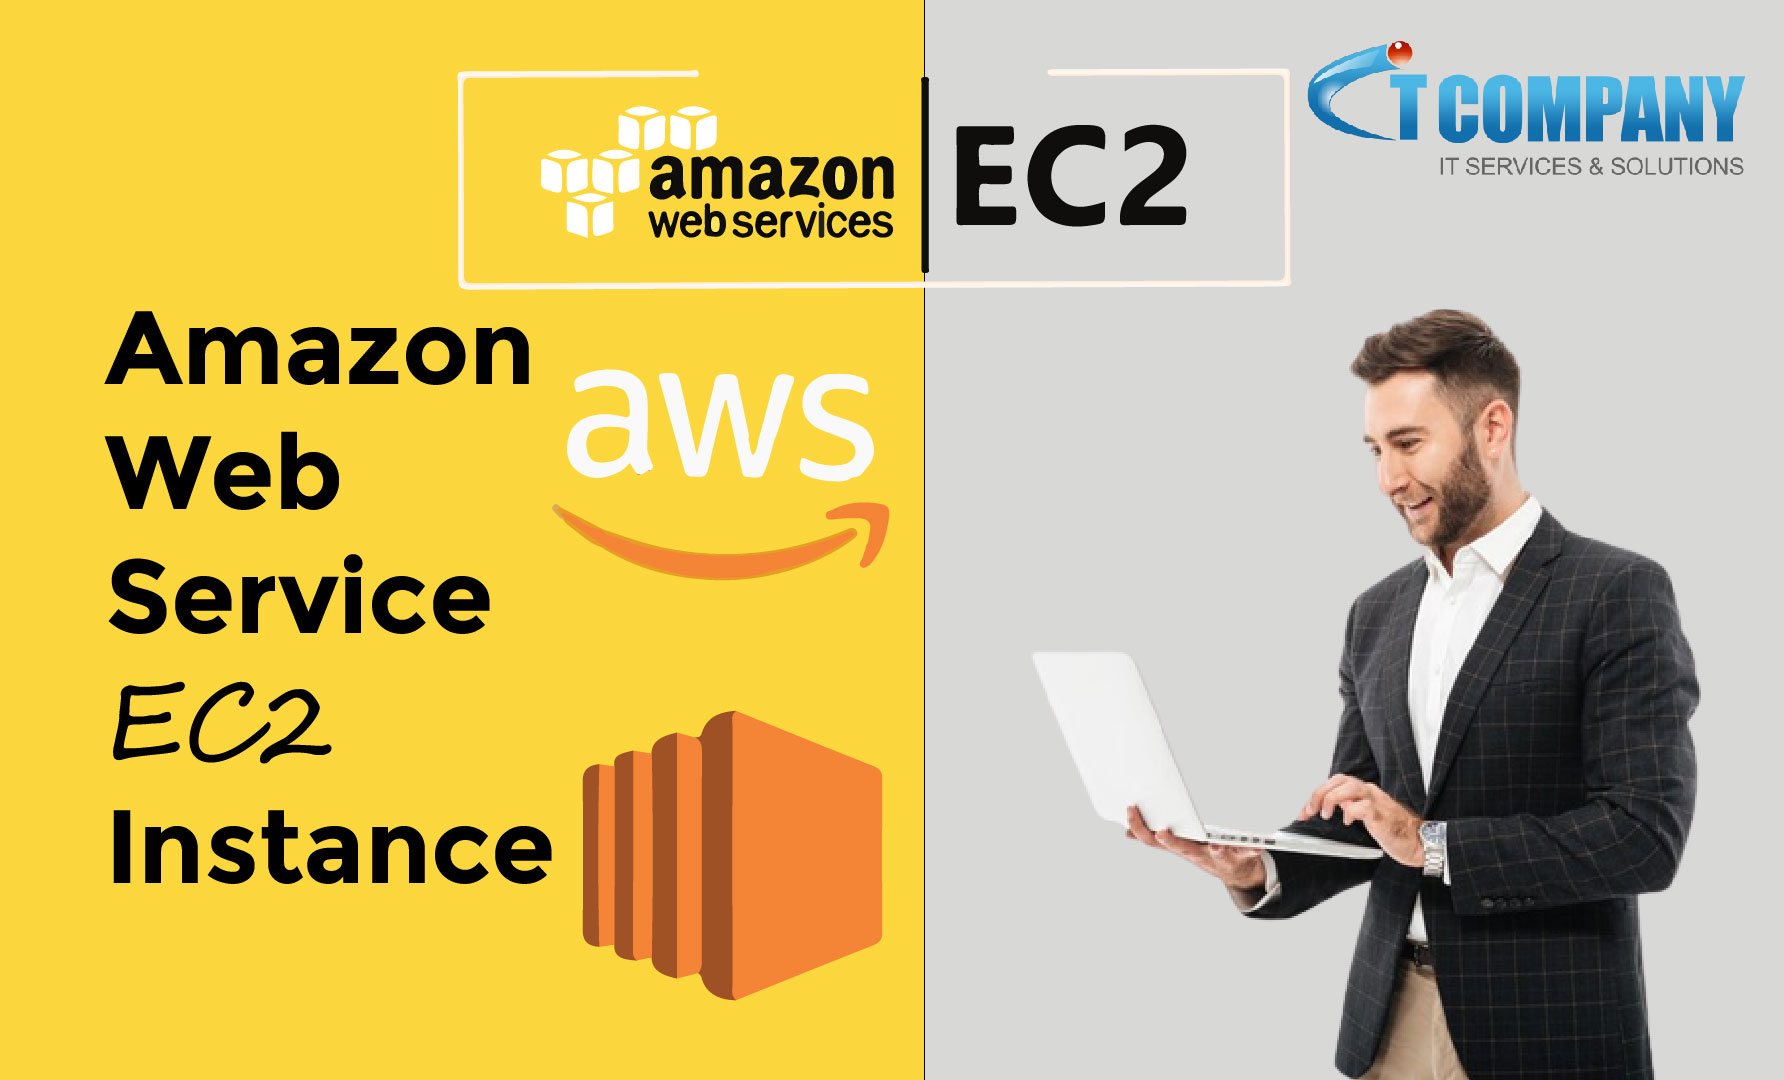 How to Deploy EC2 Instance App in AWS or Just use IT Company’s Managed AWS Cloud